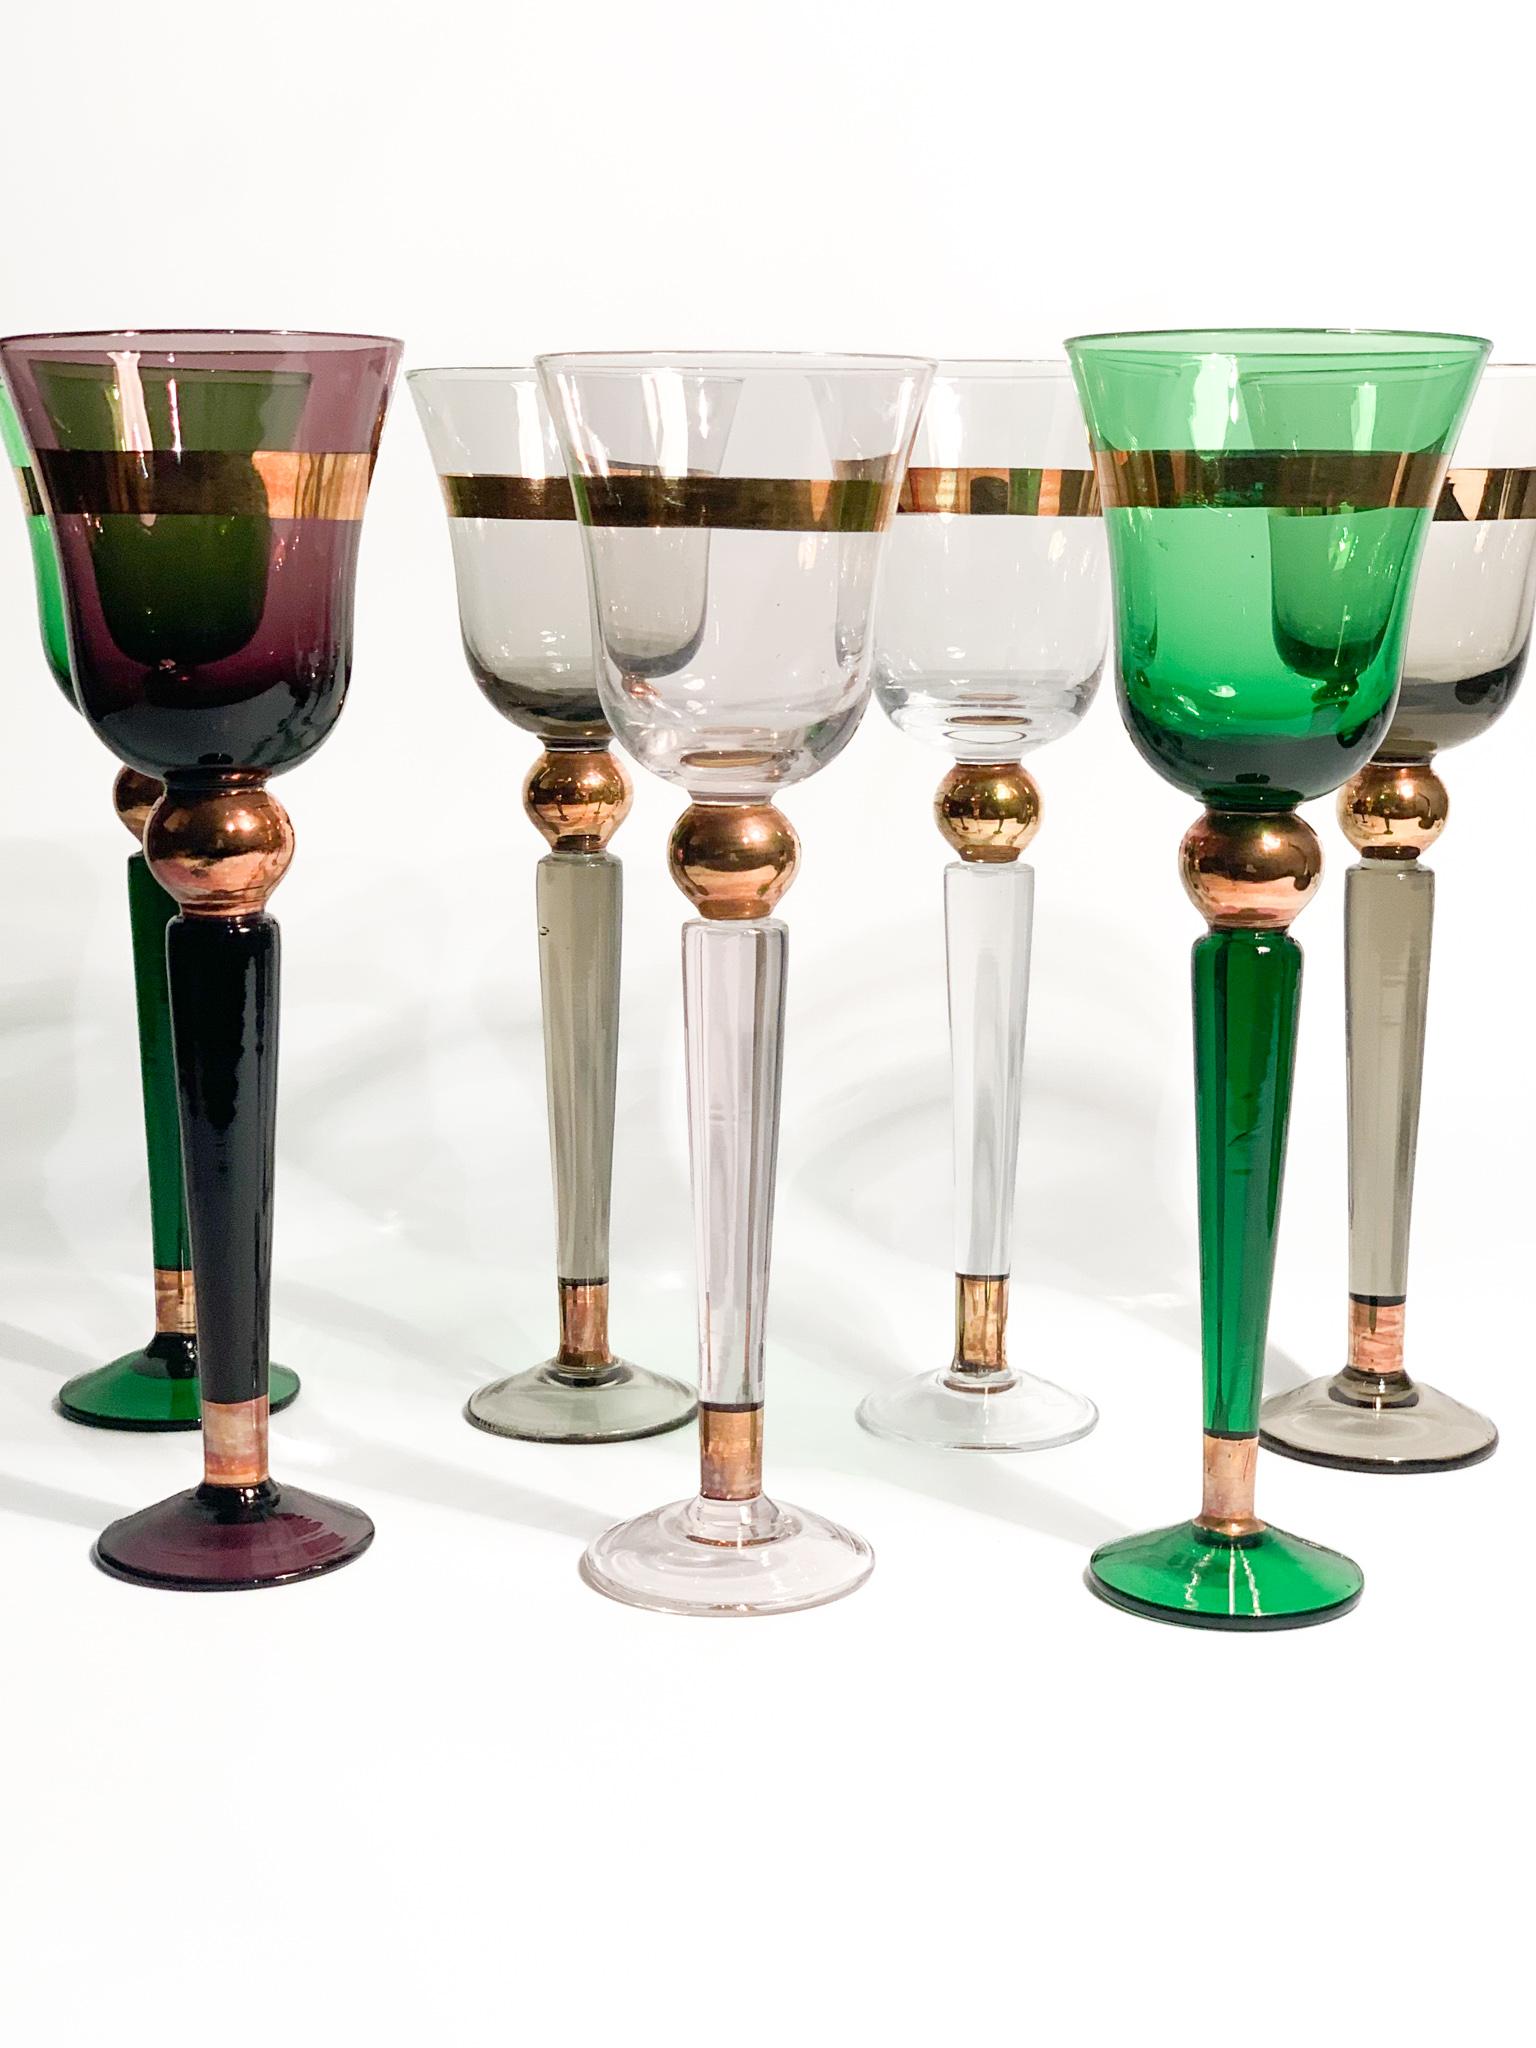 Set of 6 Venini Multicolored Murano Glass Goblets from the 1950s For Sale 11